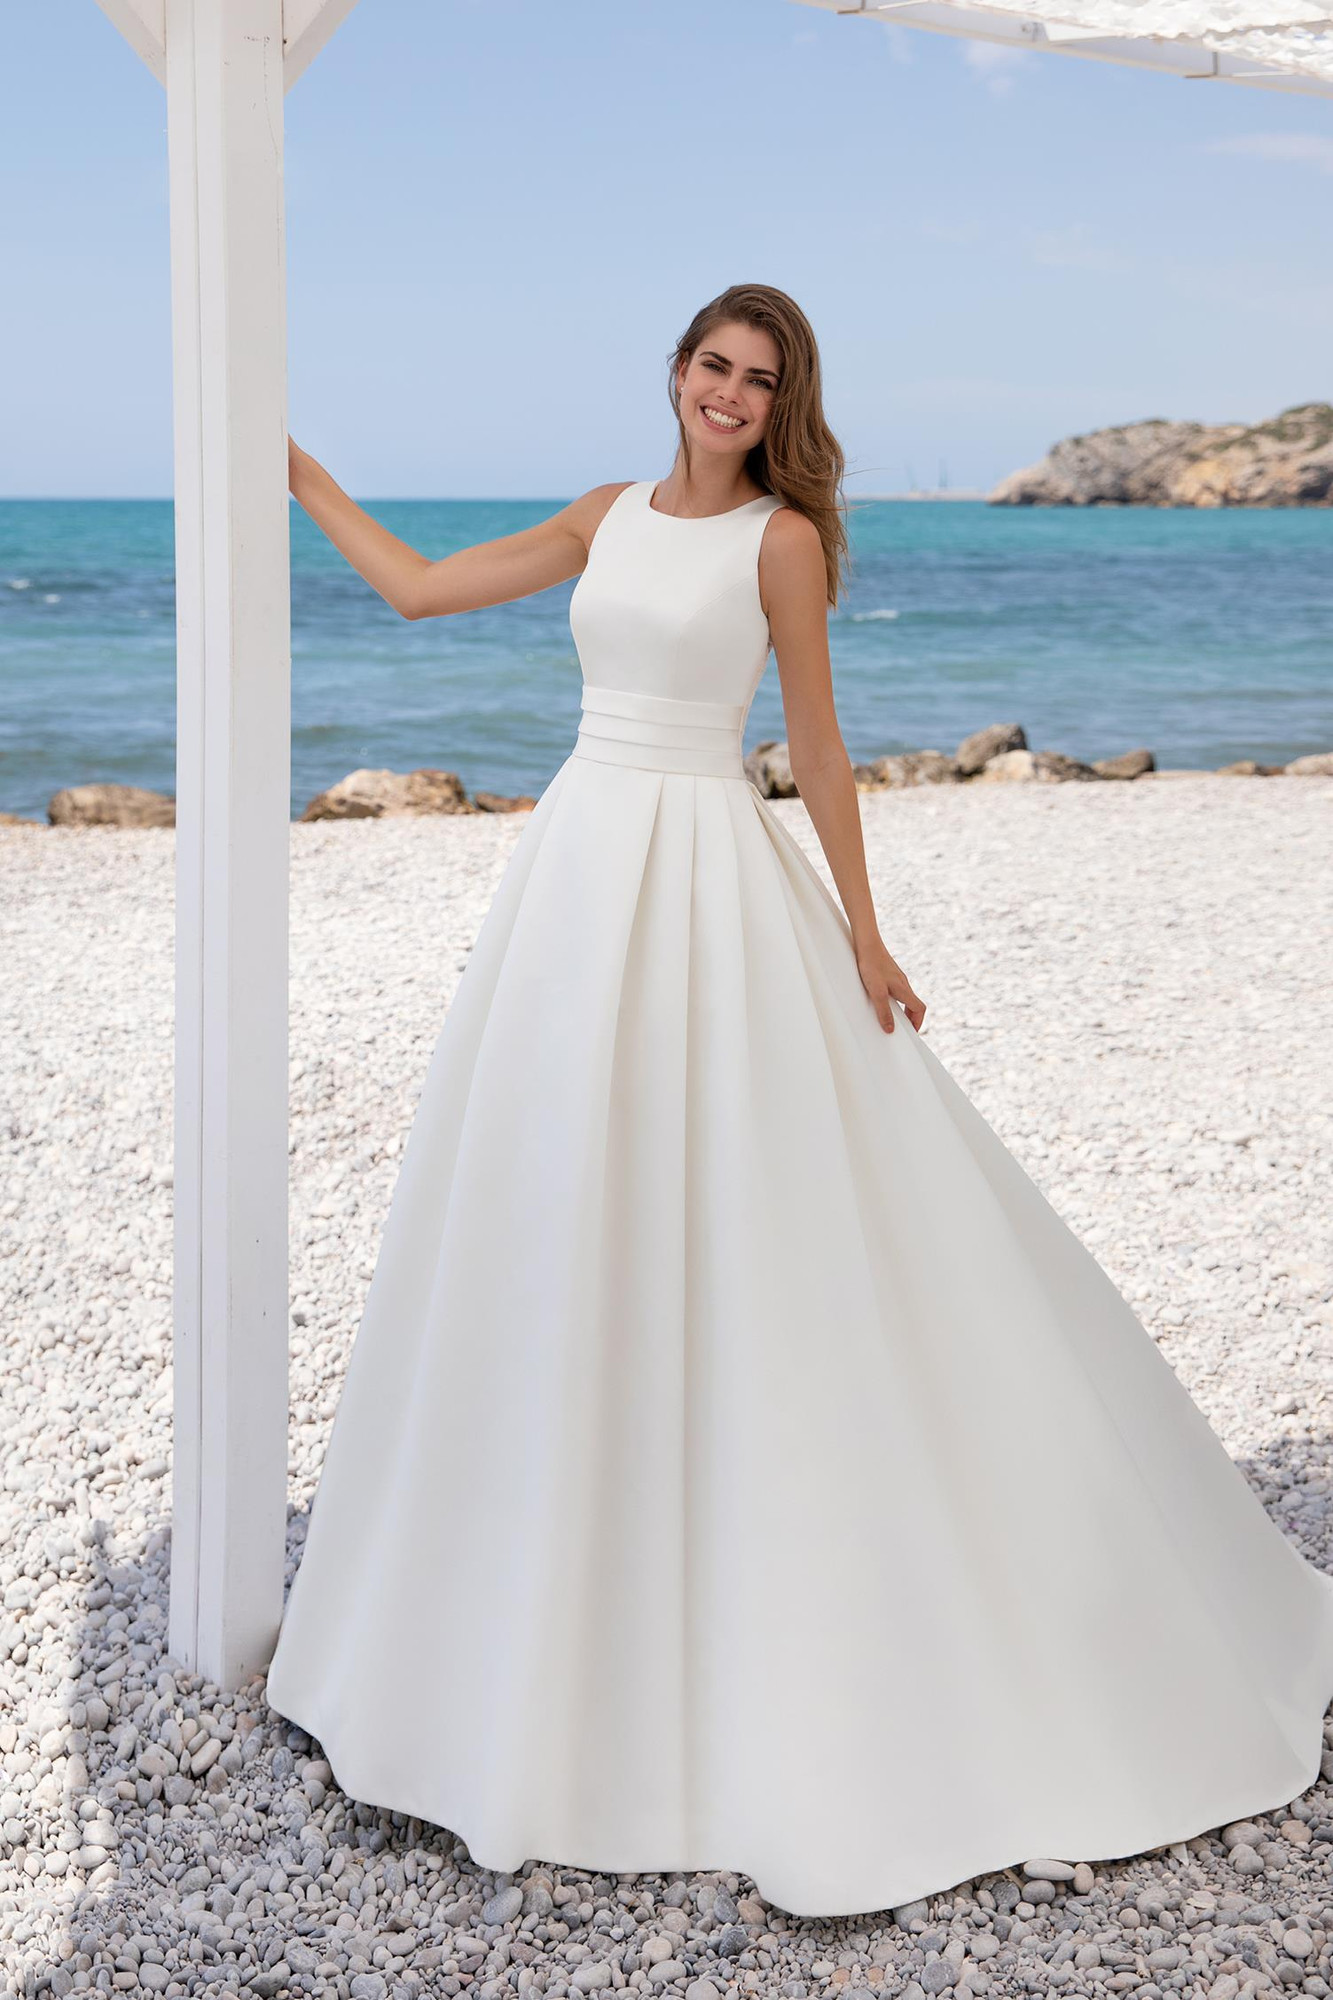 Lia Wedding Dress from White One hitched.co.uk